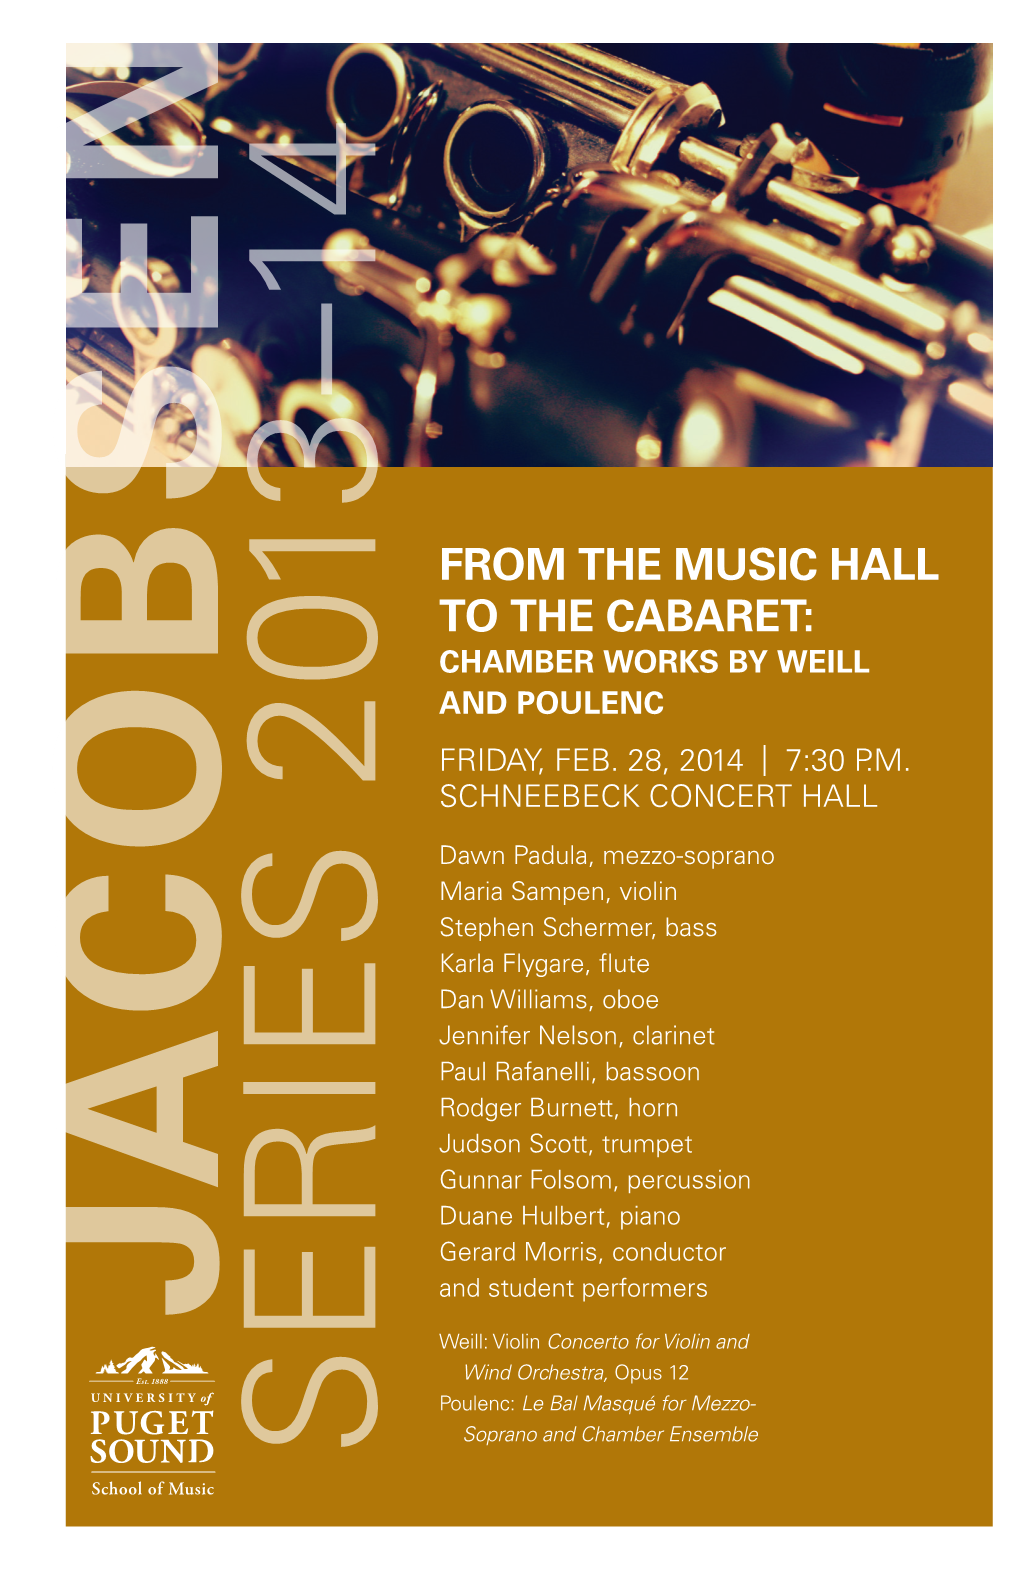 From the Music Hall to the Cabaret: Chamber Works by Weill and Poulenc